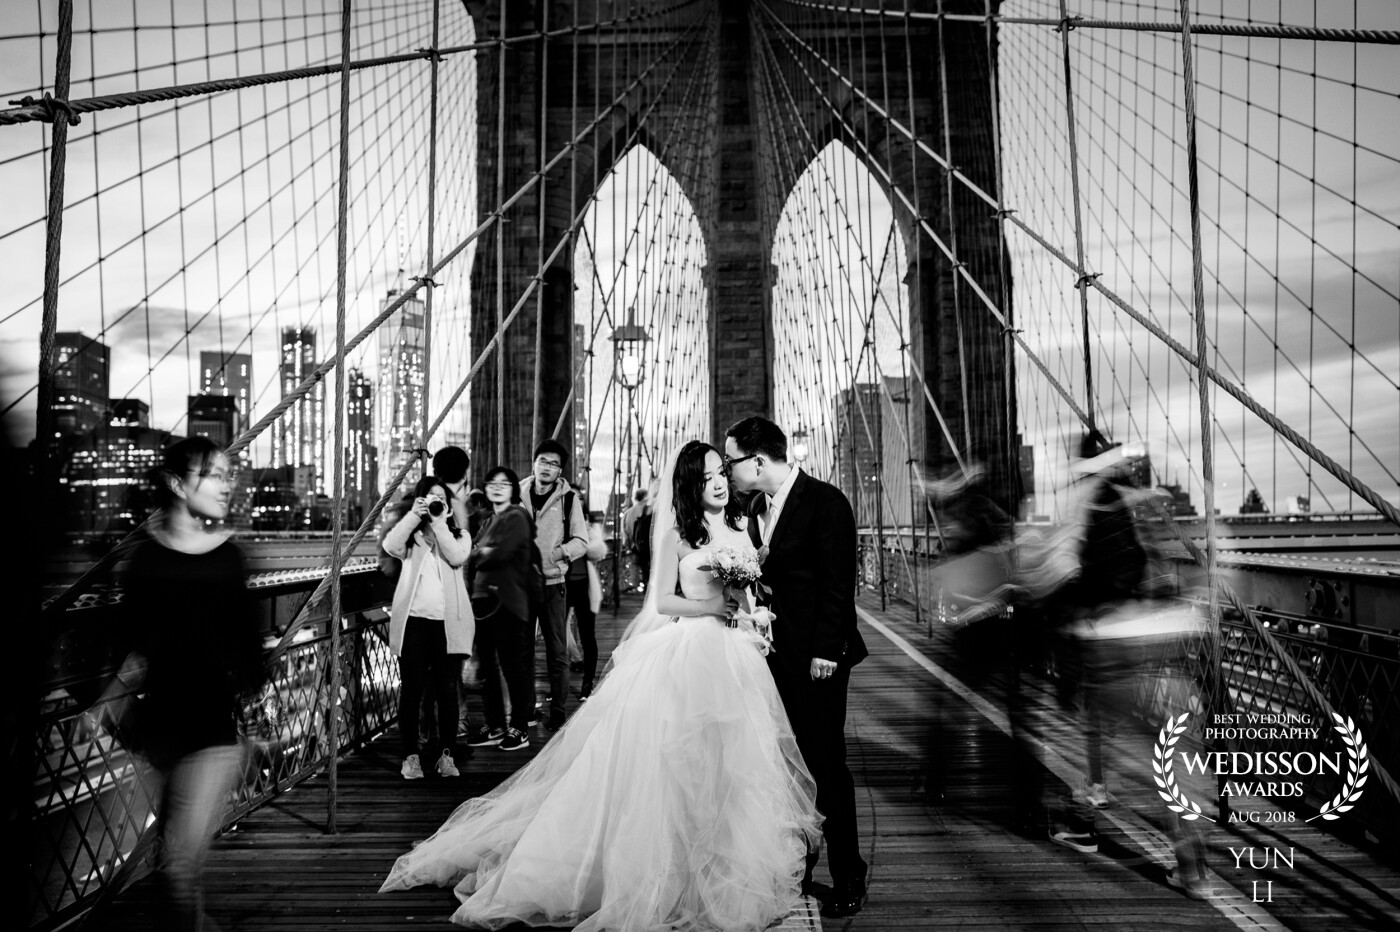 I knew that there would be a lot of people on the Brooklyn Bridge, so I brought a tripod and envisioned this image in my mind. When we got to the bridge, it was getting dark. I was able to use a shutter speed slow enough to get the intended motion blur of the crowd. Everything worked just perfectly for this image.